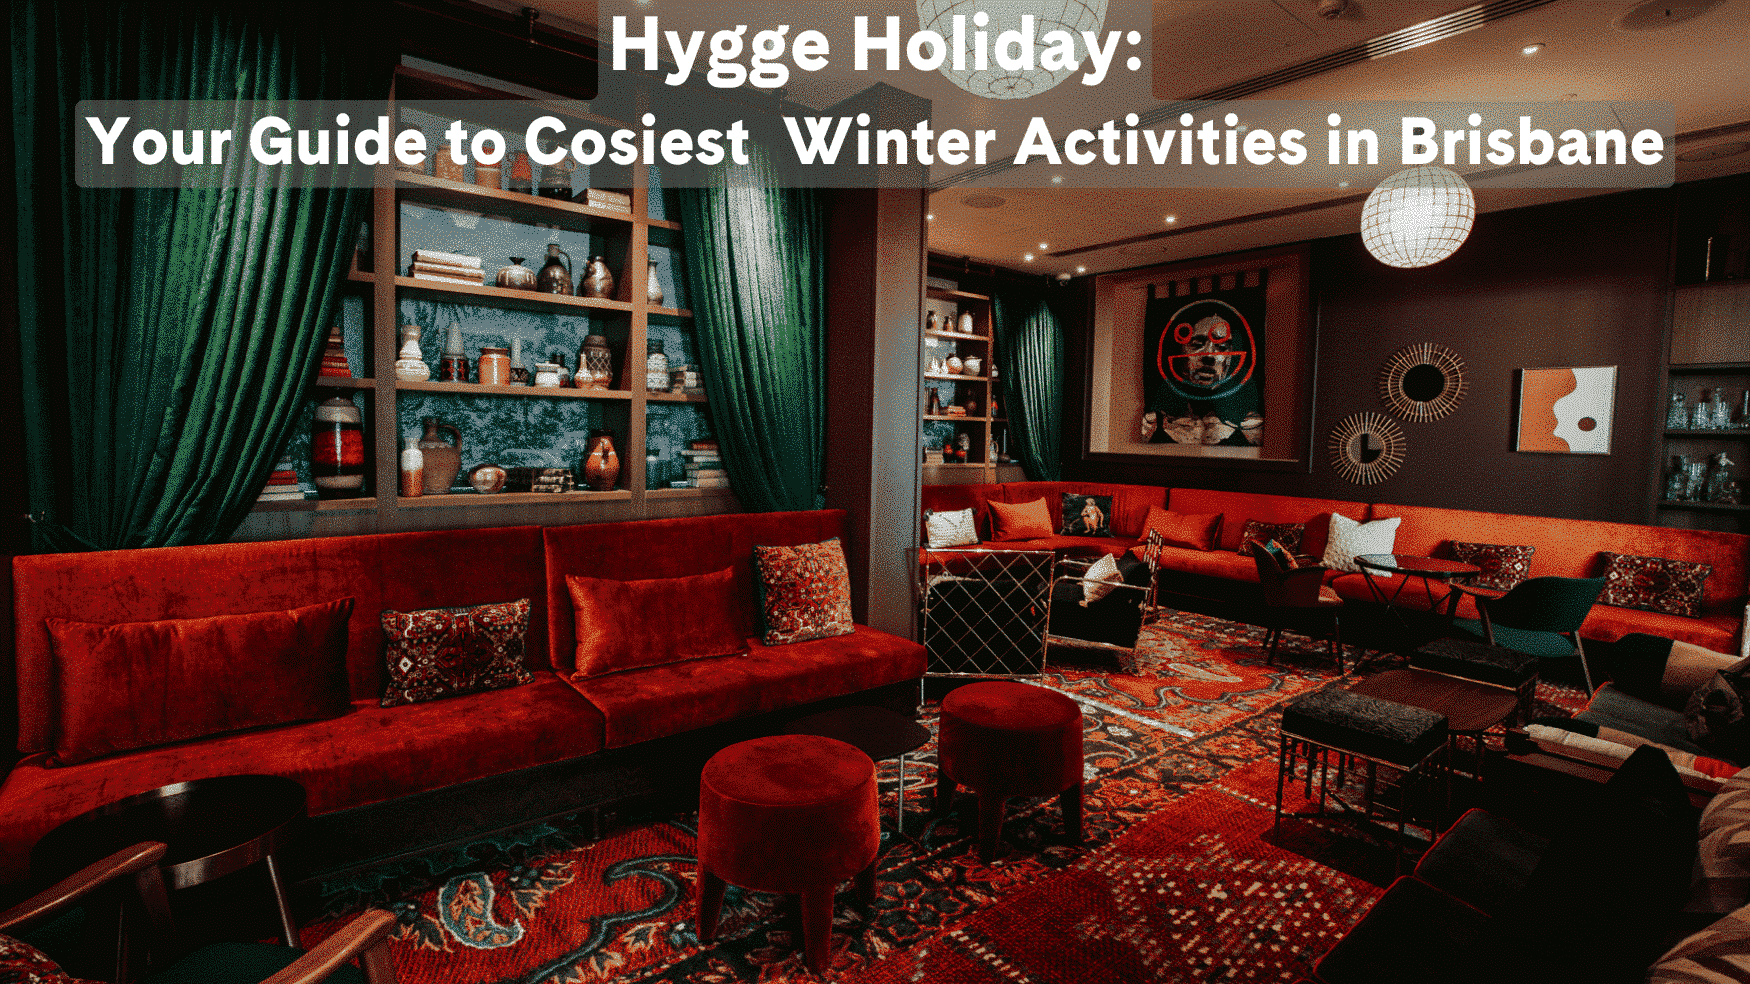 Your Guide to Cosiest Activities in Brisbane